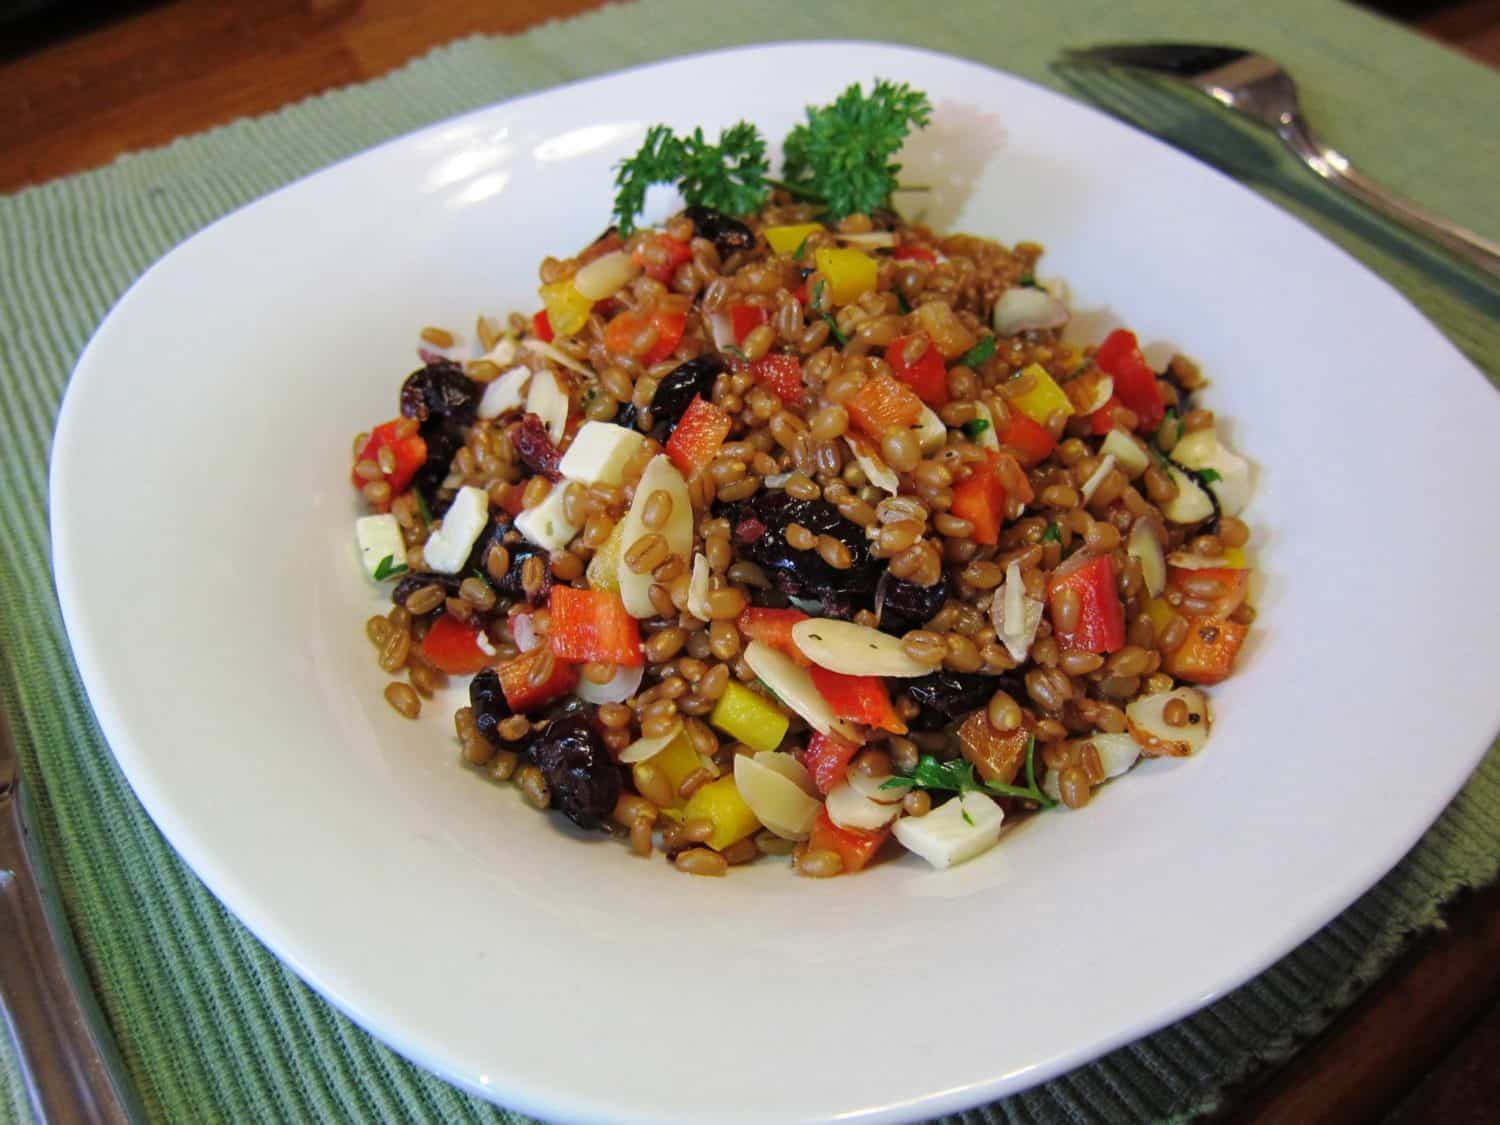 Red wheat berry salad